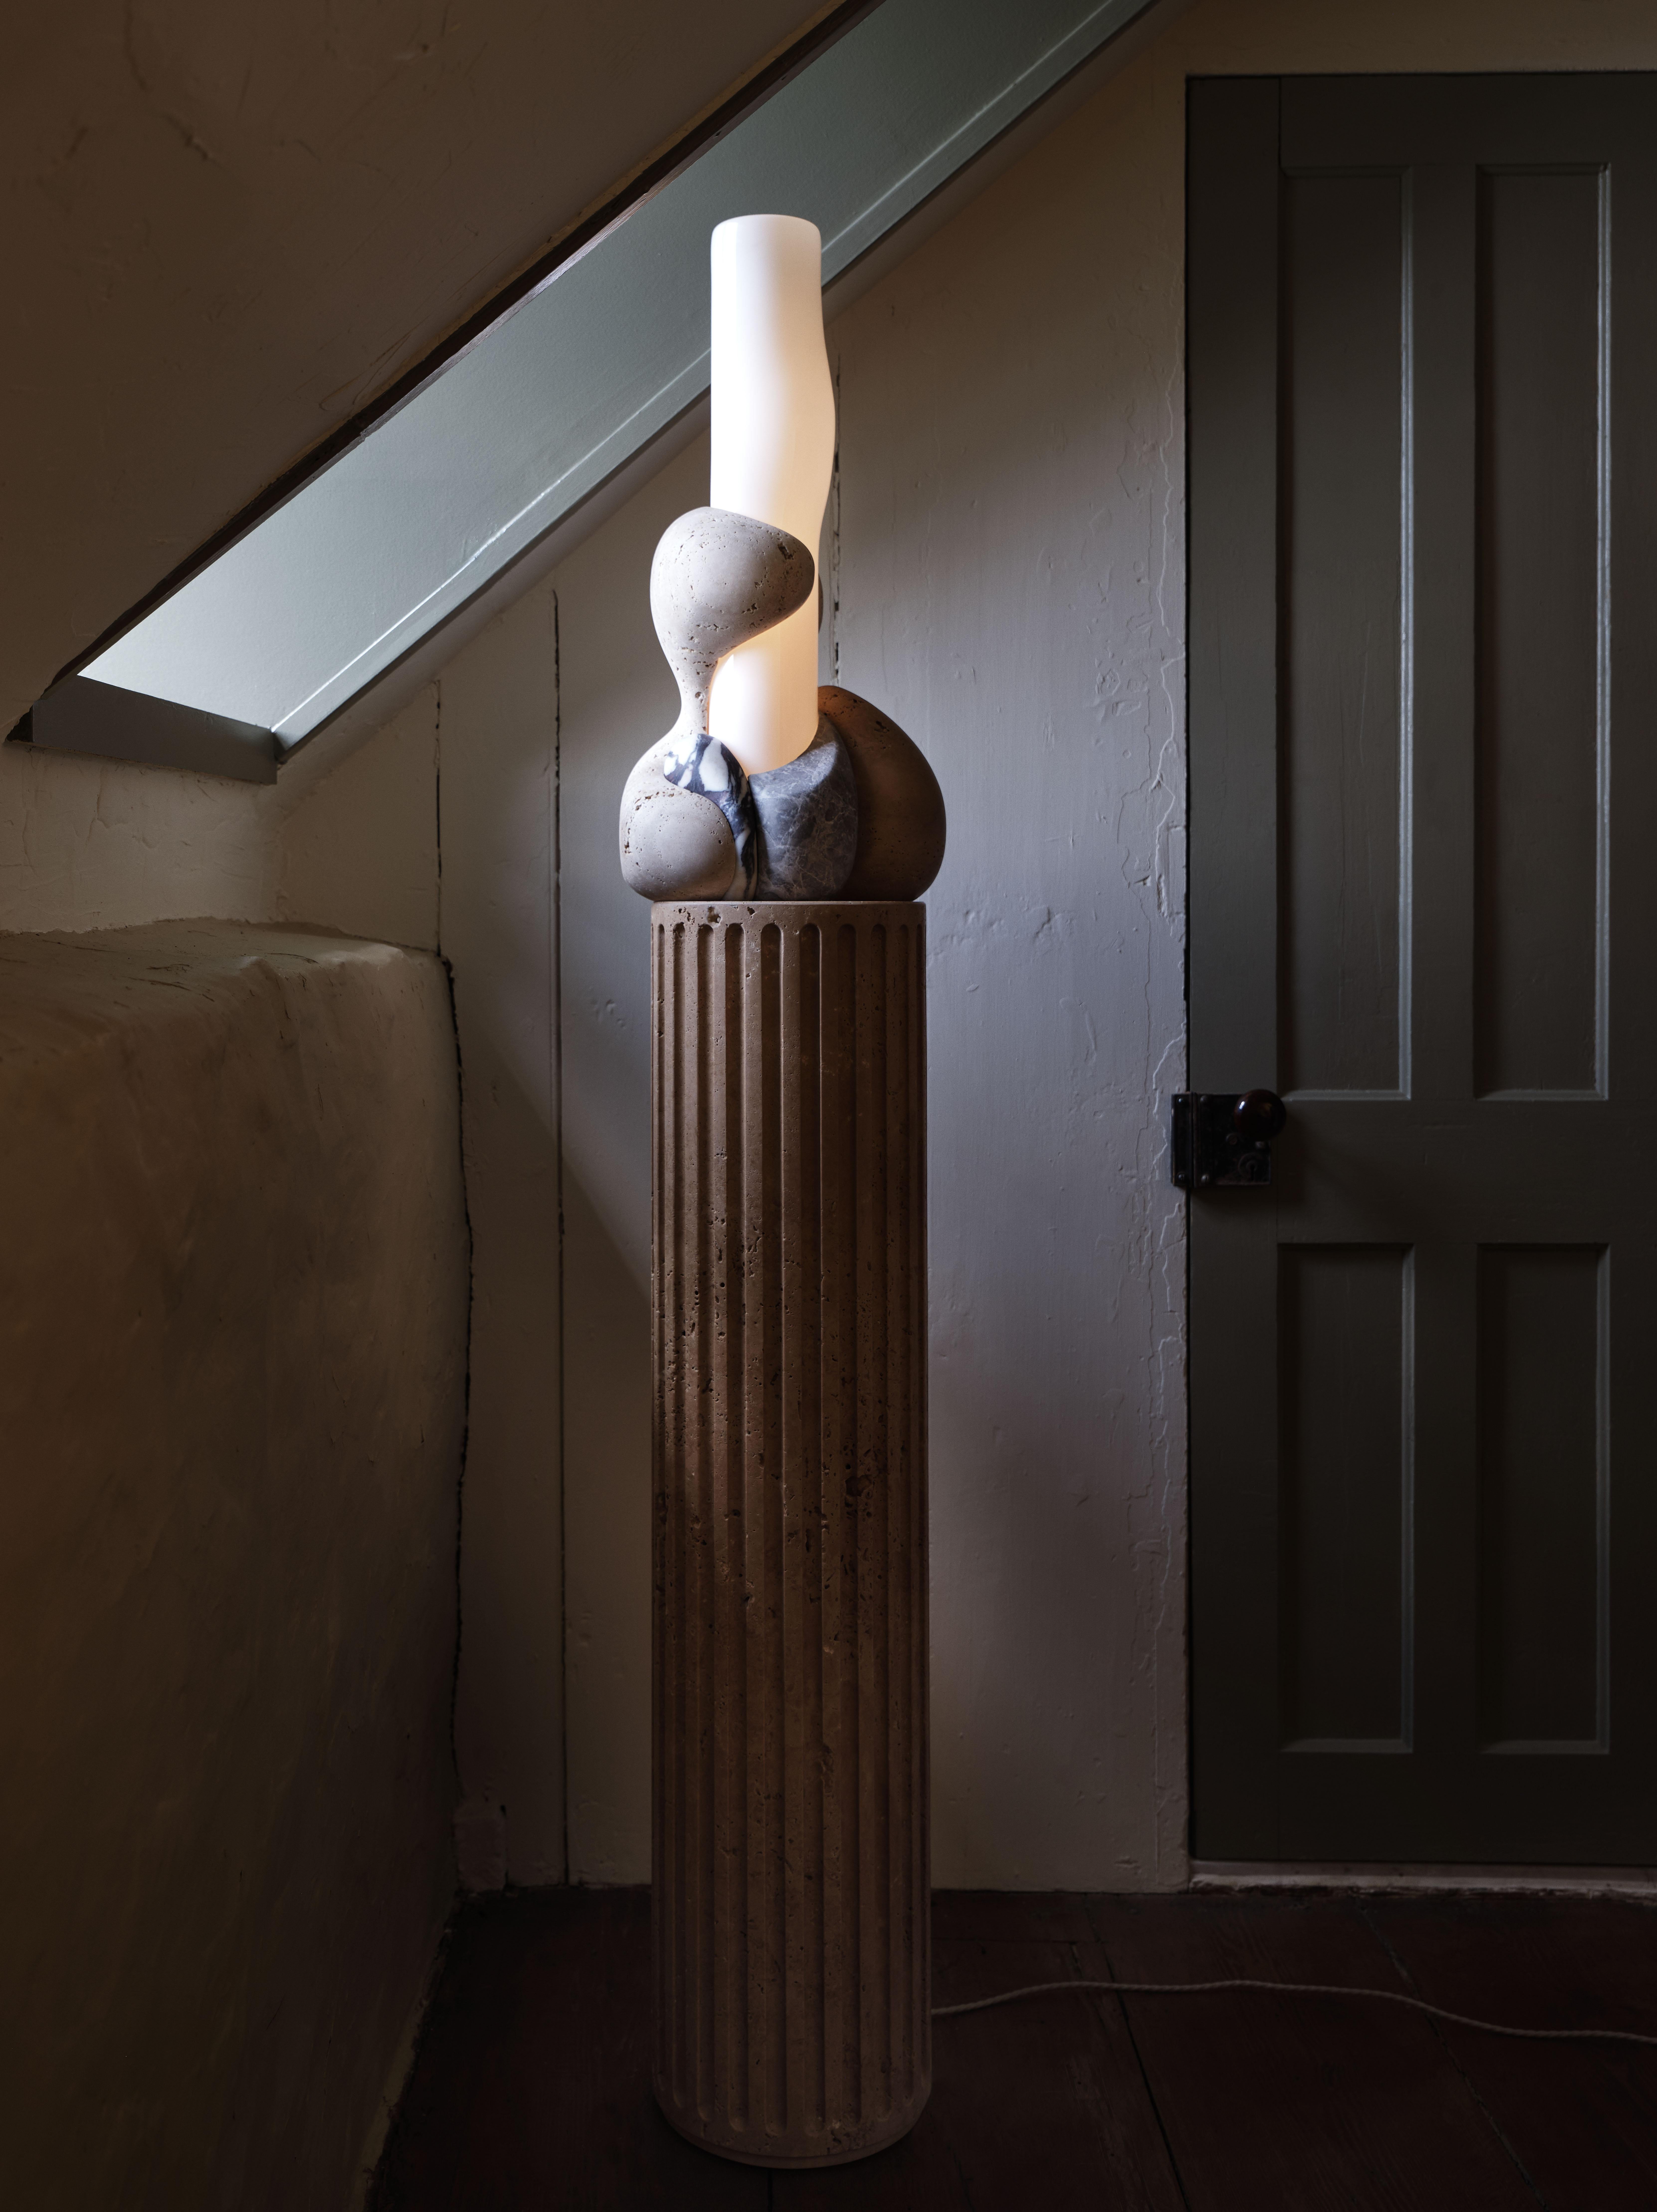 Perched atop of a round fluted travertine plinth, organic forms carved from various types of stone embrace a hand-blown glass cylinder which glows from within.

Materials: Light and Dark Travertine, Siylon Gray, Viola Calacatta, White Glossy